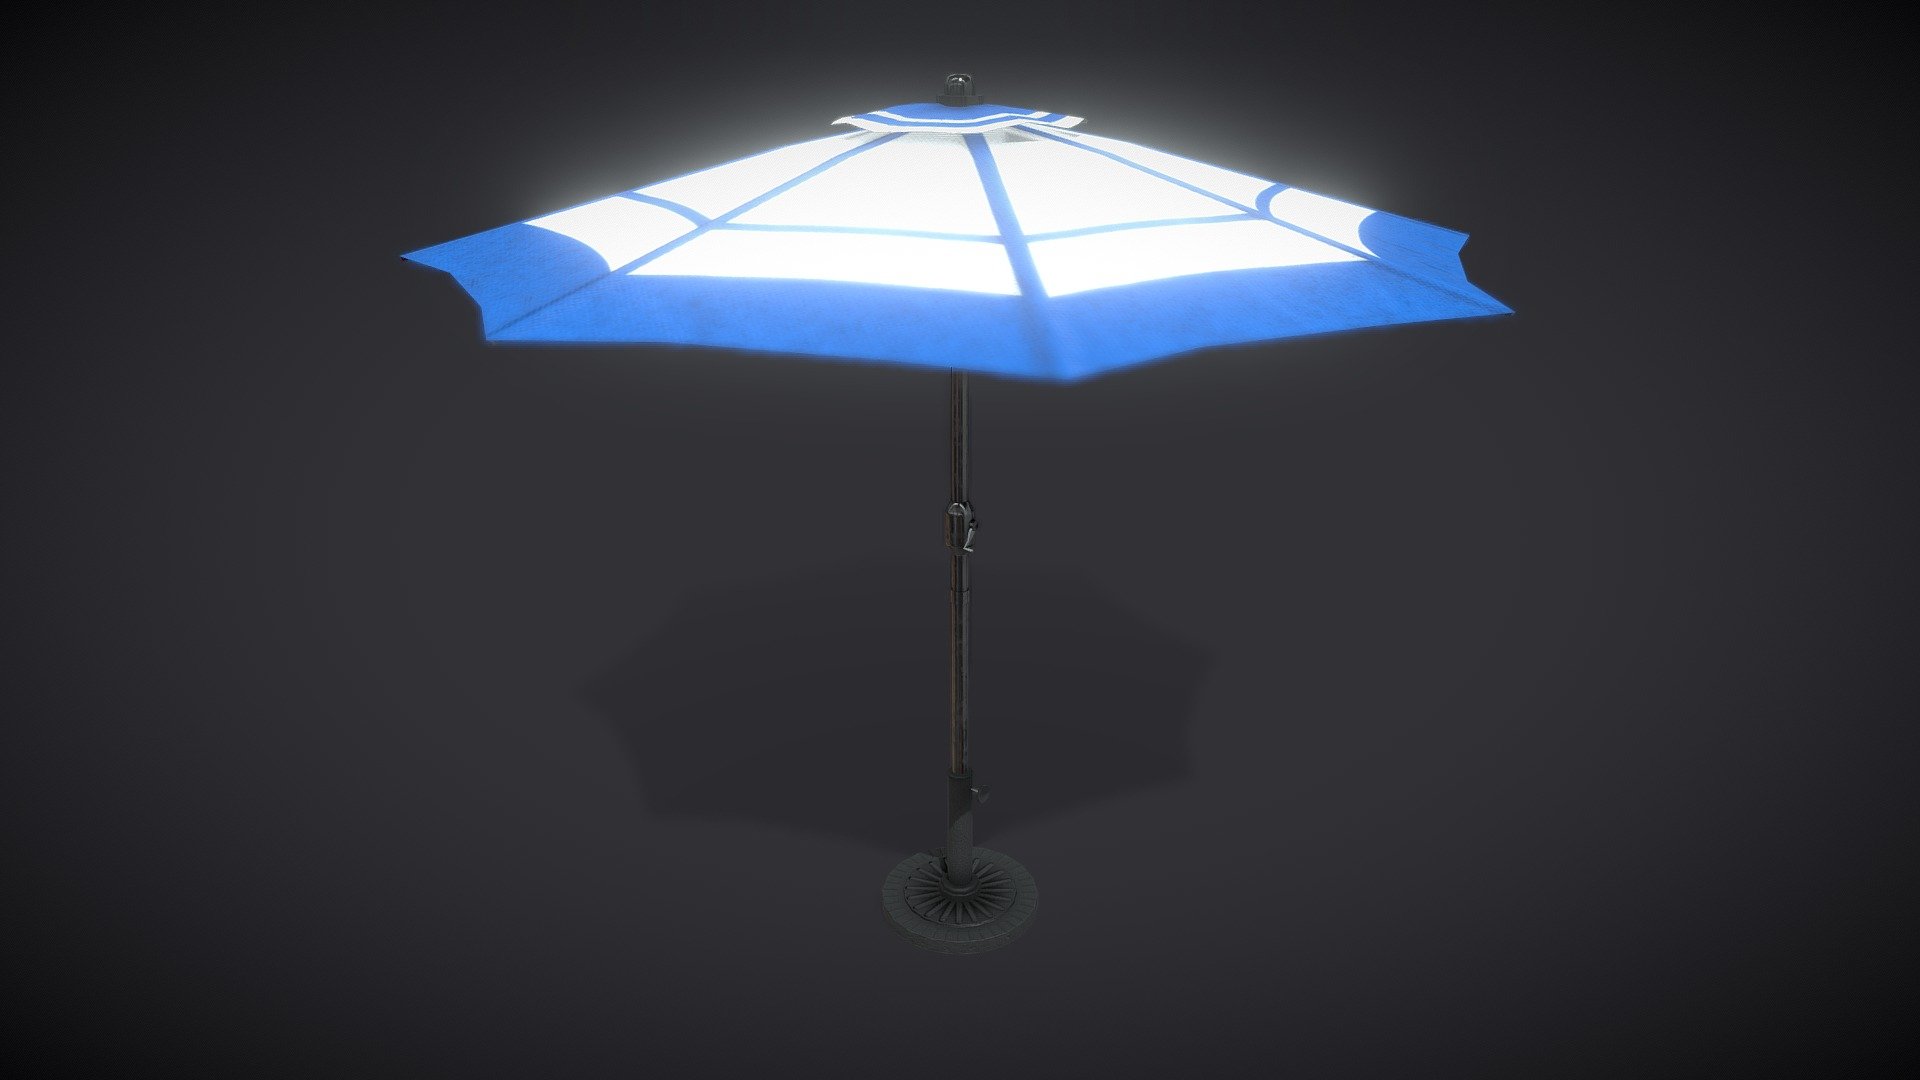 Greek Villa - Asset Pack





Beach Umbrella

.............

OVA’s flagship software, StellarX, allows those with no programming or coding knowledge to place 3D goods and create immersive experiences through simple drag-and-drop actions. 

Storytelling, which involves a series of interactions, sequences, and triggers are easily created through OVA’s patent-pending visual scripting tool. 

.............

**Download StellarX on the Meta Quest Store: oculus.com/experiences/quest/8132958546745663
**

**Download StellarX on Steam: store.steampowered.com/app/1214640/StellarX
**

Have a bigger immersive project in mind? Get in touch with us! 



StellarX on LinkedIn: linkedin.com/showcase/stellarx-by-ova

Join the StellarX Discord server! 

........

StellarX© 2022 - Beach Umbrella - Buy Royalty Free 3D model by StellarX 3d model